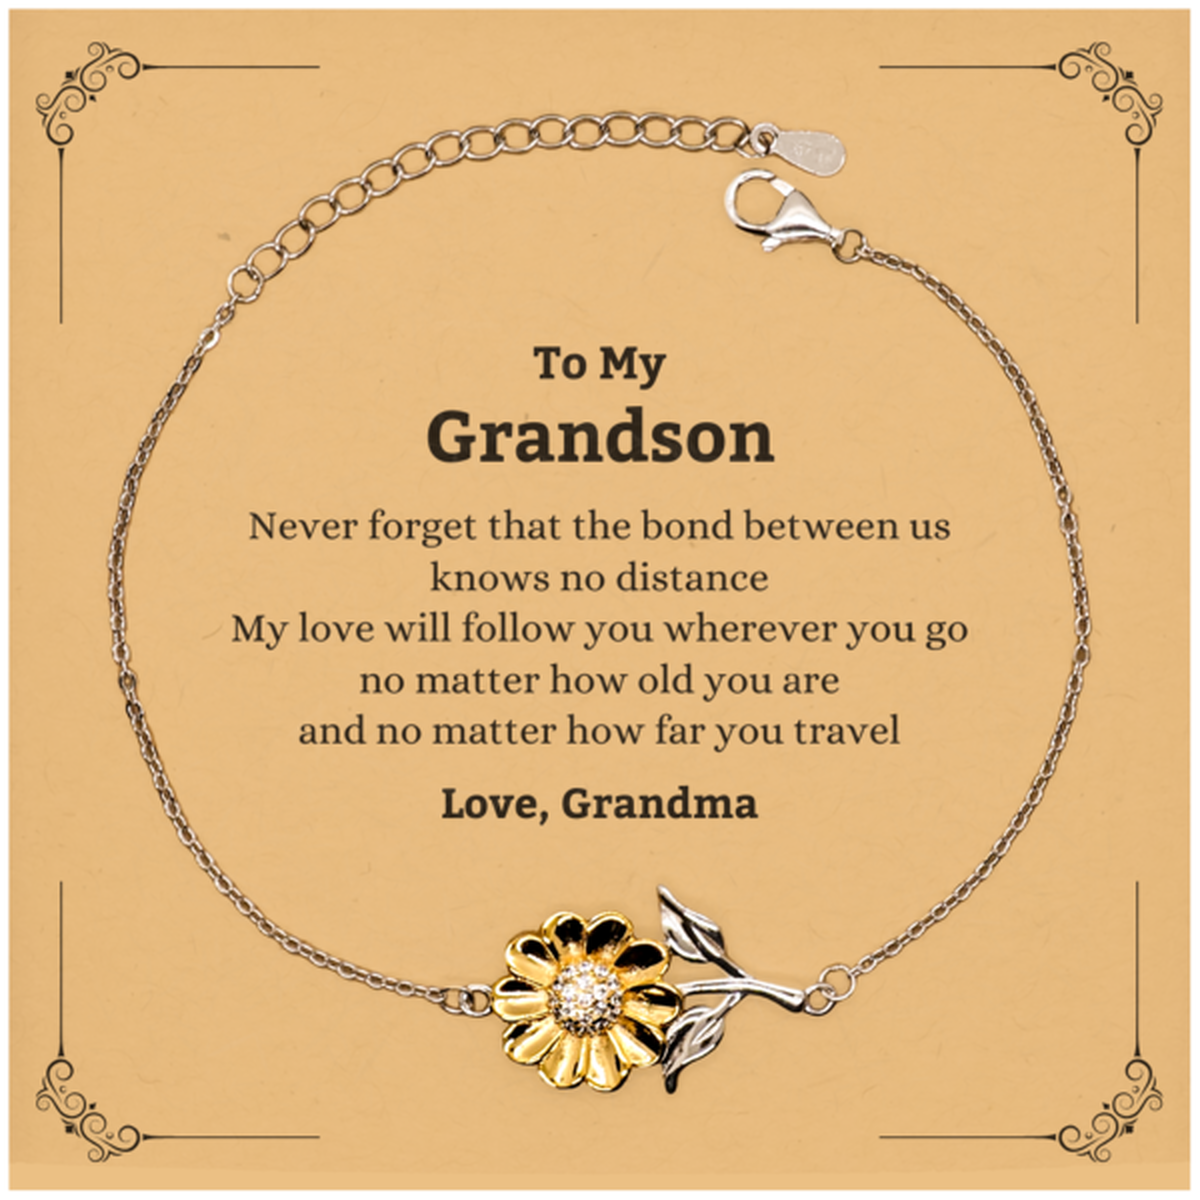 Grandson Birthday Gifts from Grandma, Adjustable Sunflower Bracelet for Grandson Christmas Graduation Unique Gifts Grandson Never forget that the bond between us knows no distance. Love, Grandma